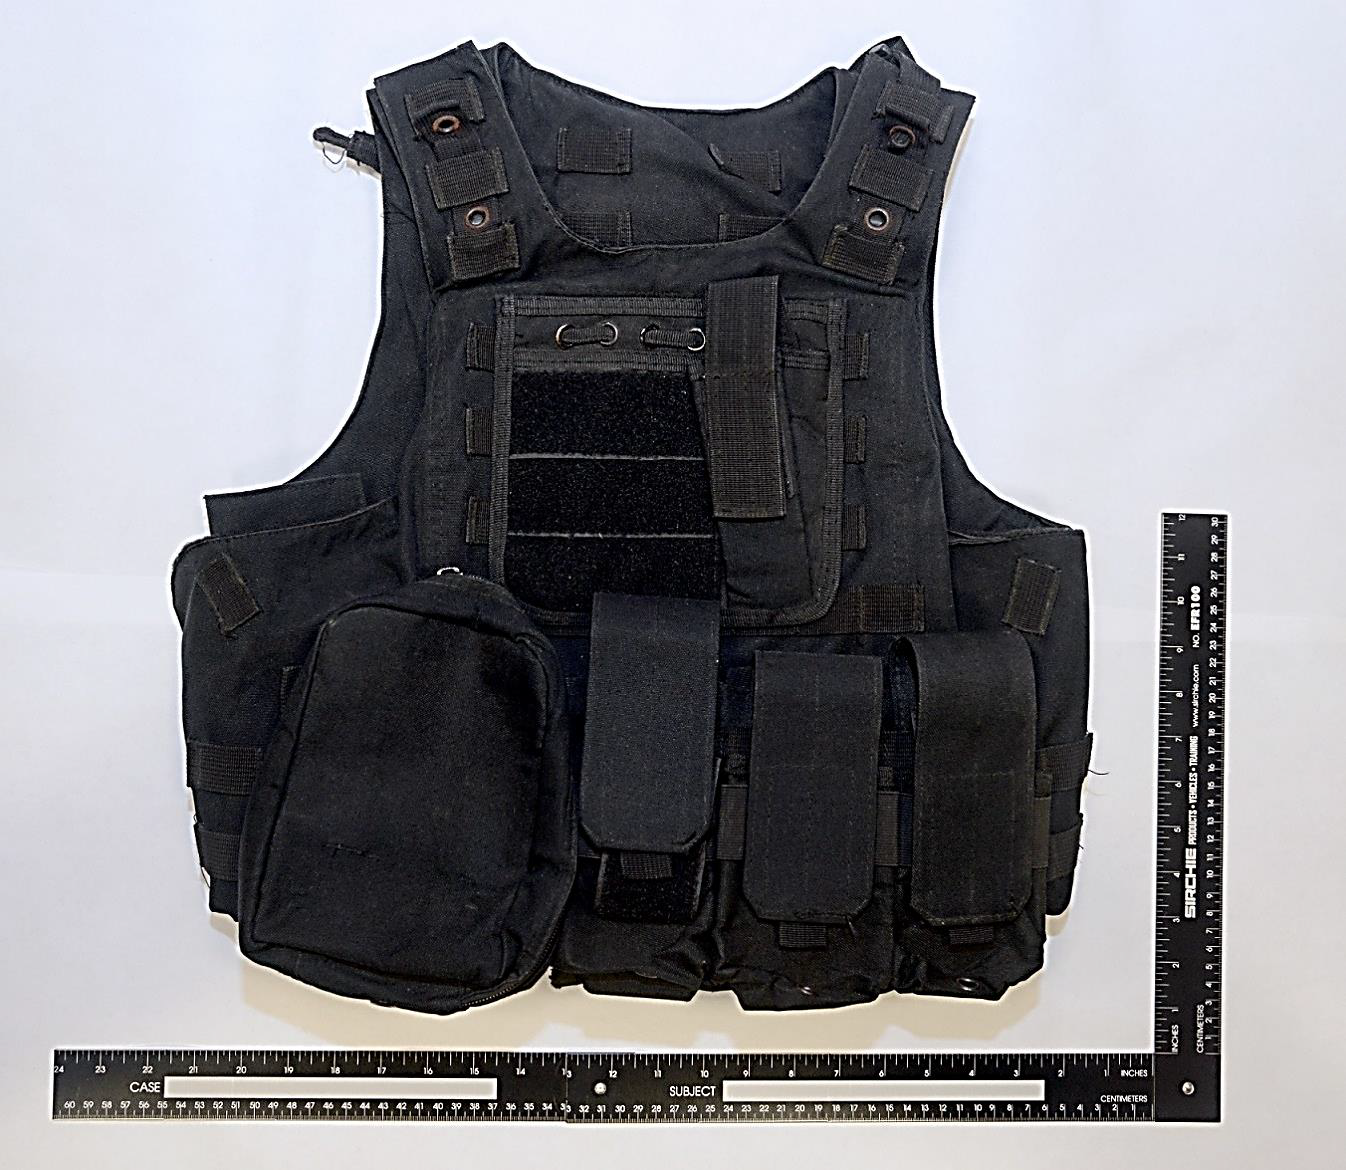 The tactical vest that the teenager in Singapore had bought for his use during the attack &nbsp;on mosques